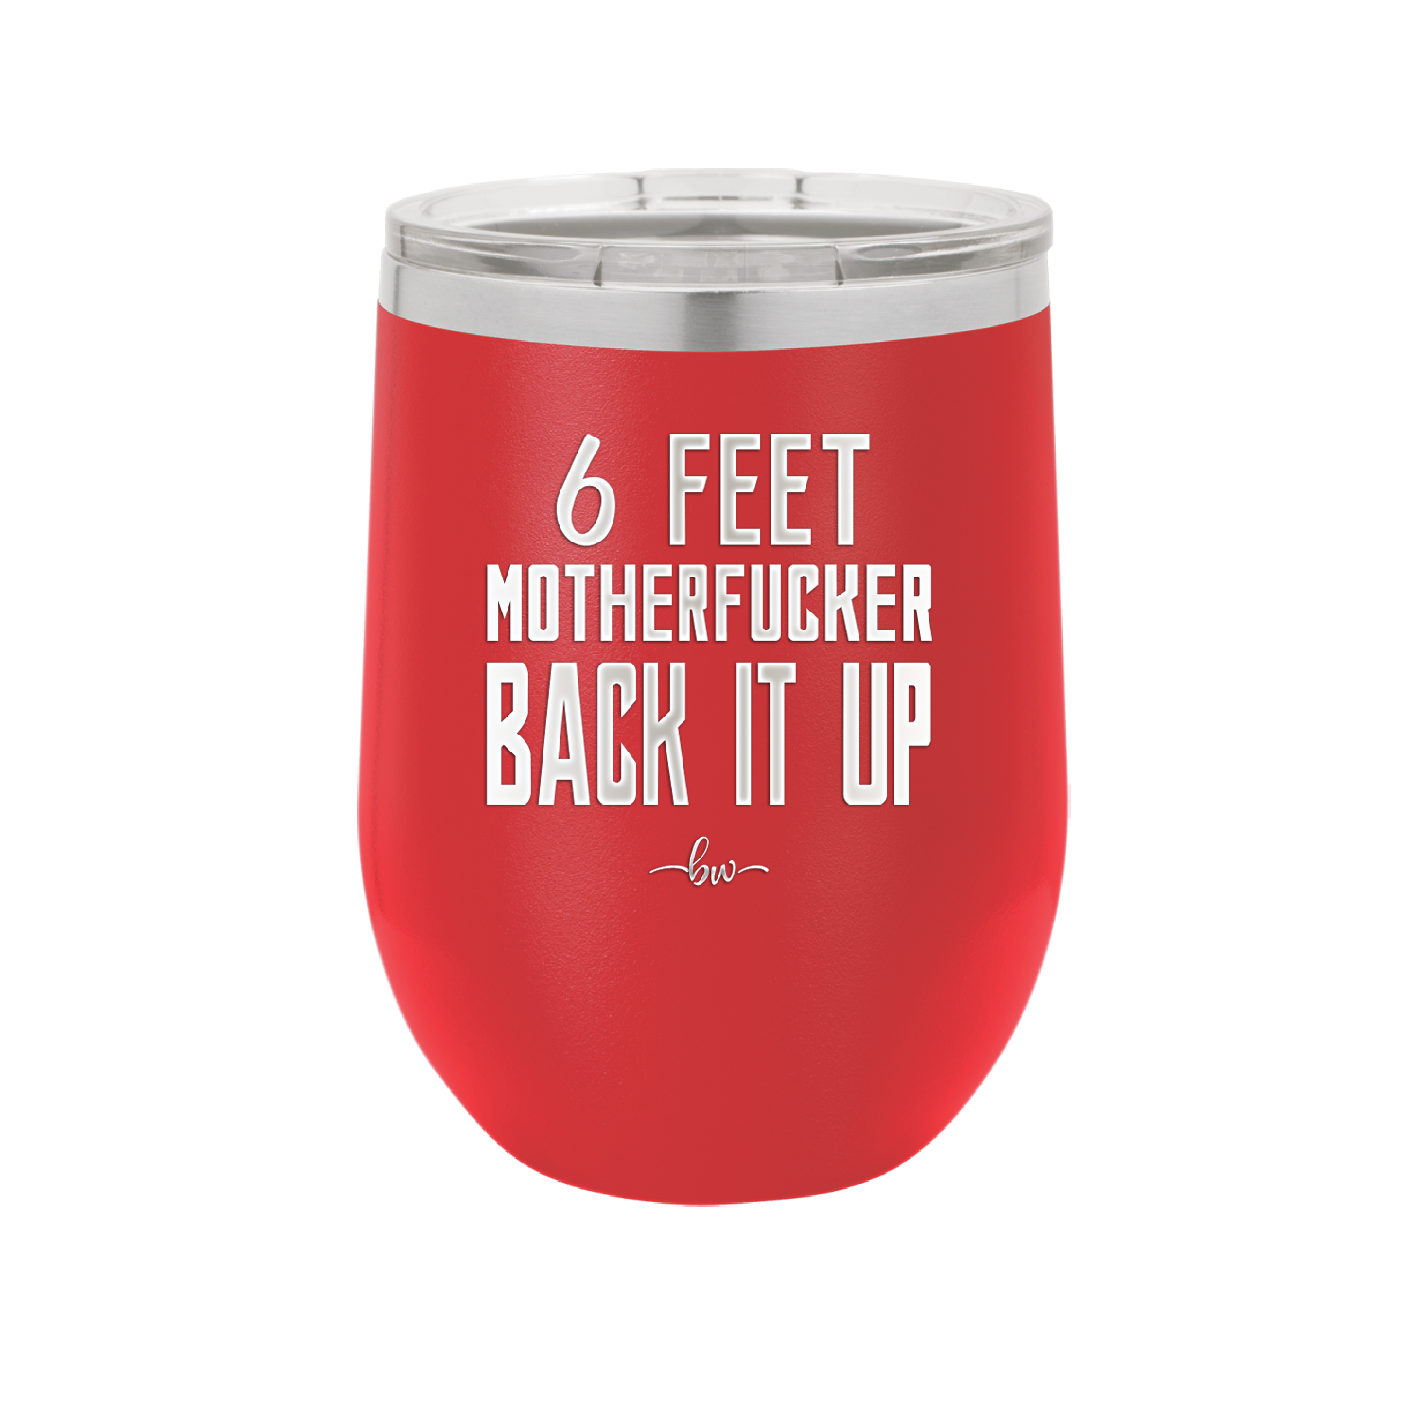 12 oz wine cup 6 feet motherfucker back it up - red